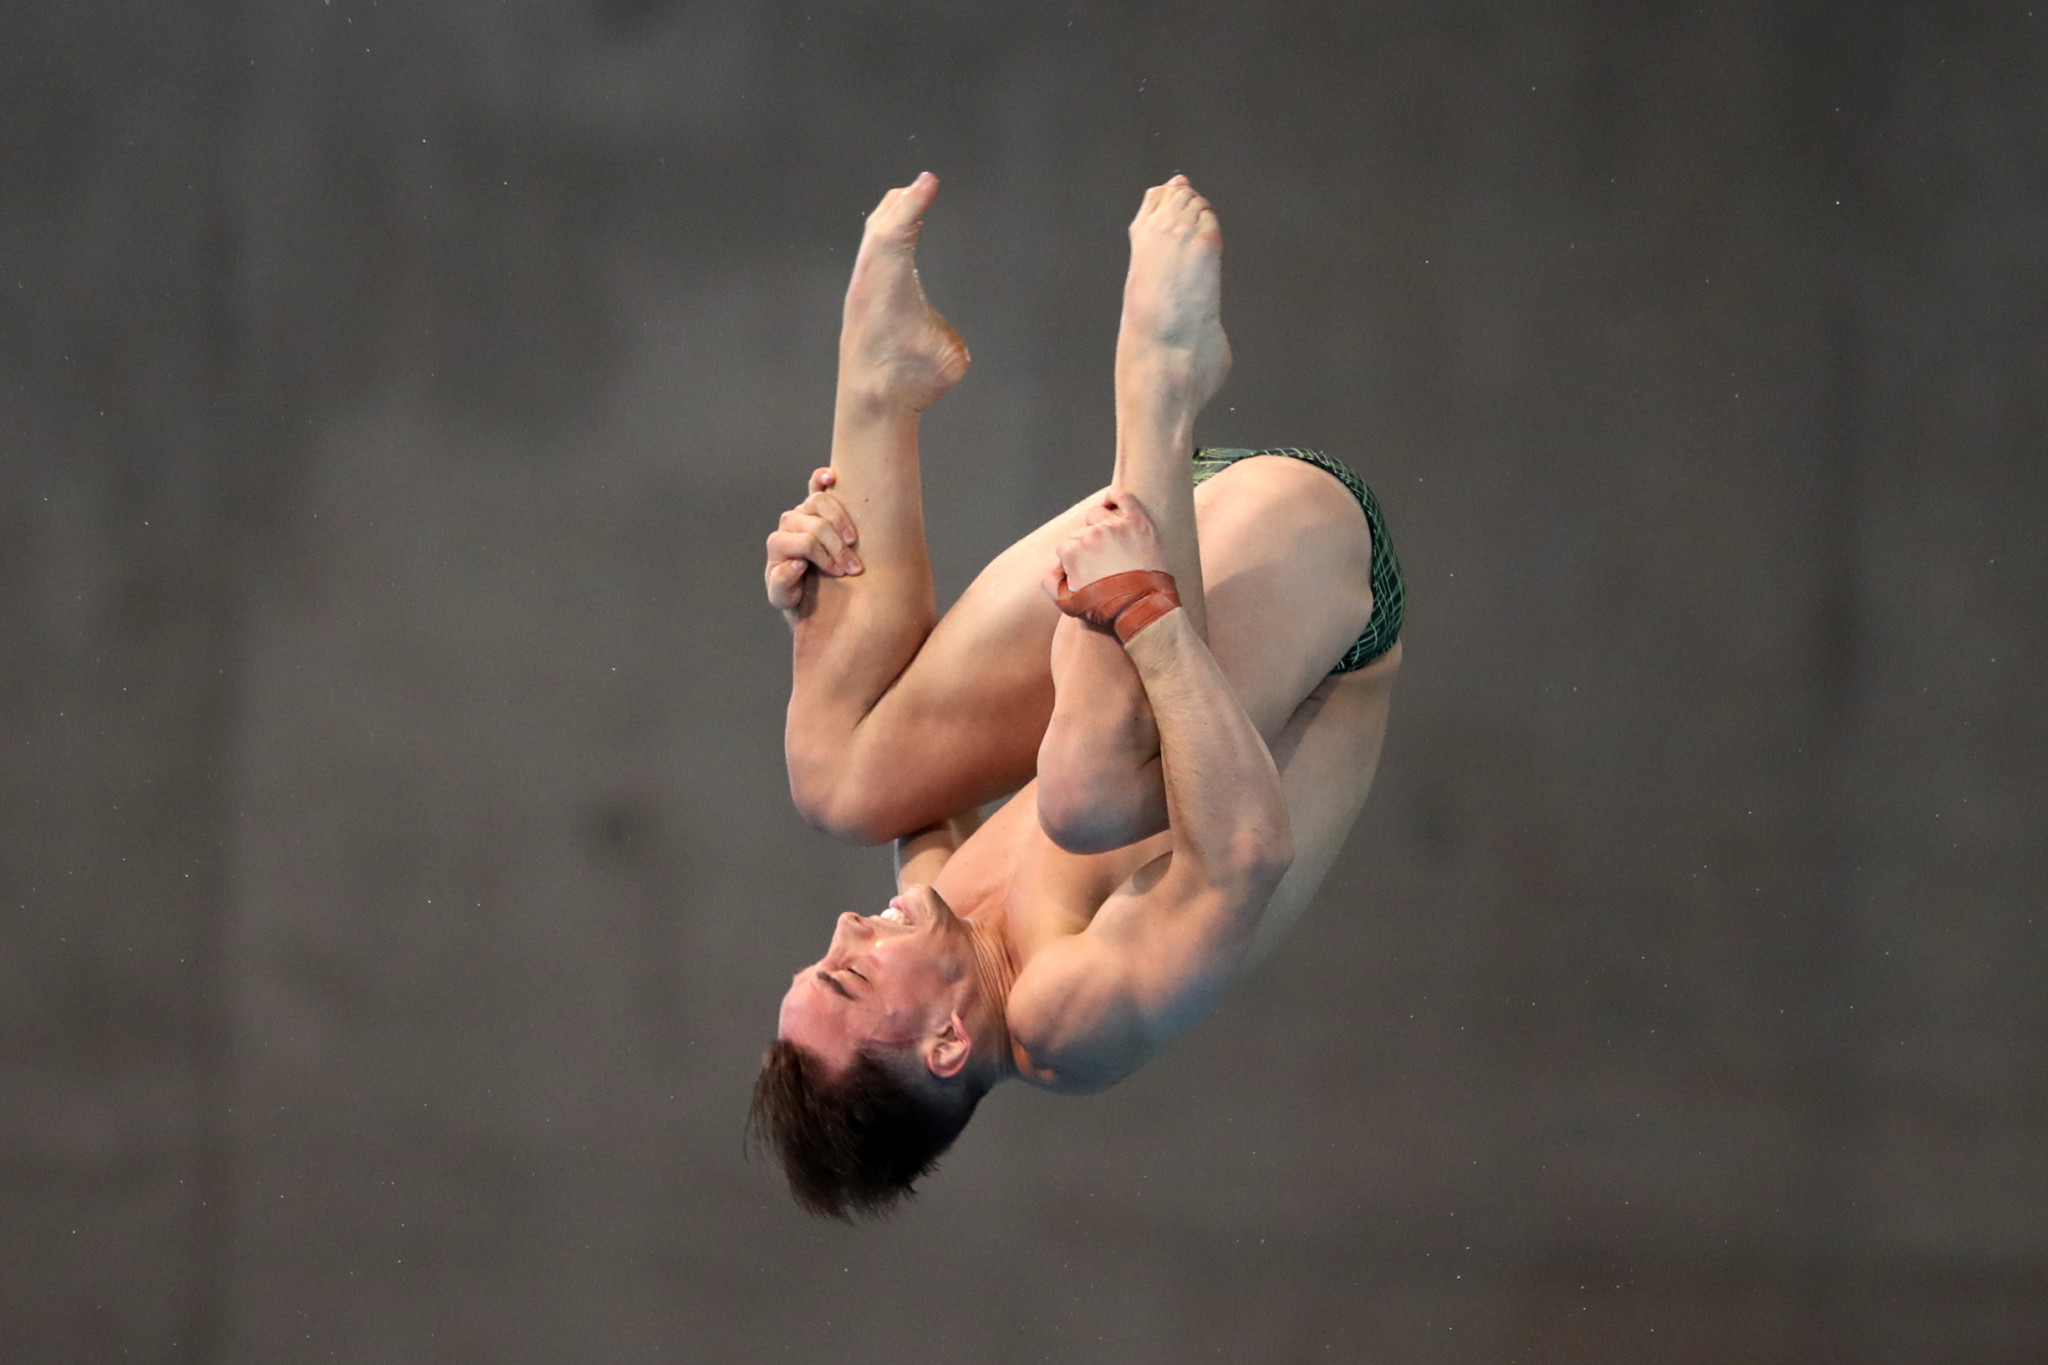 Bedggood claims gold for Australia at Oceania Diving Championships